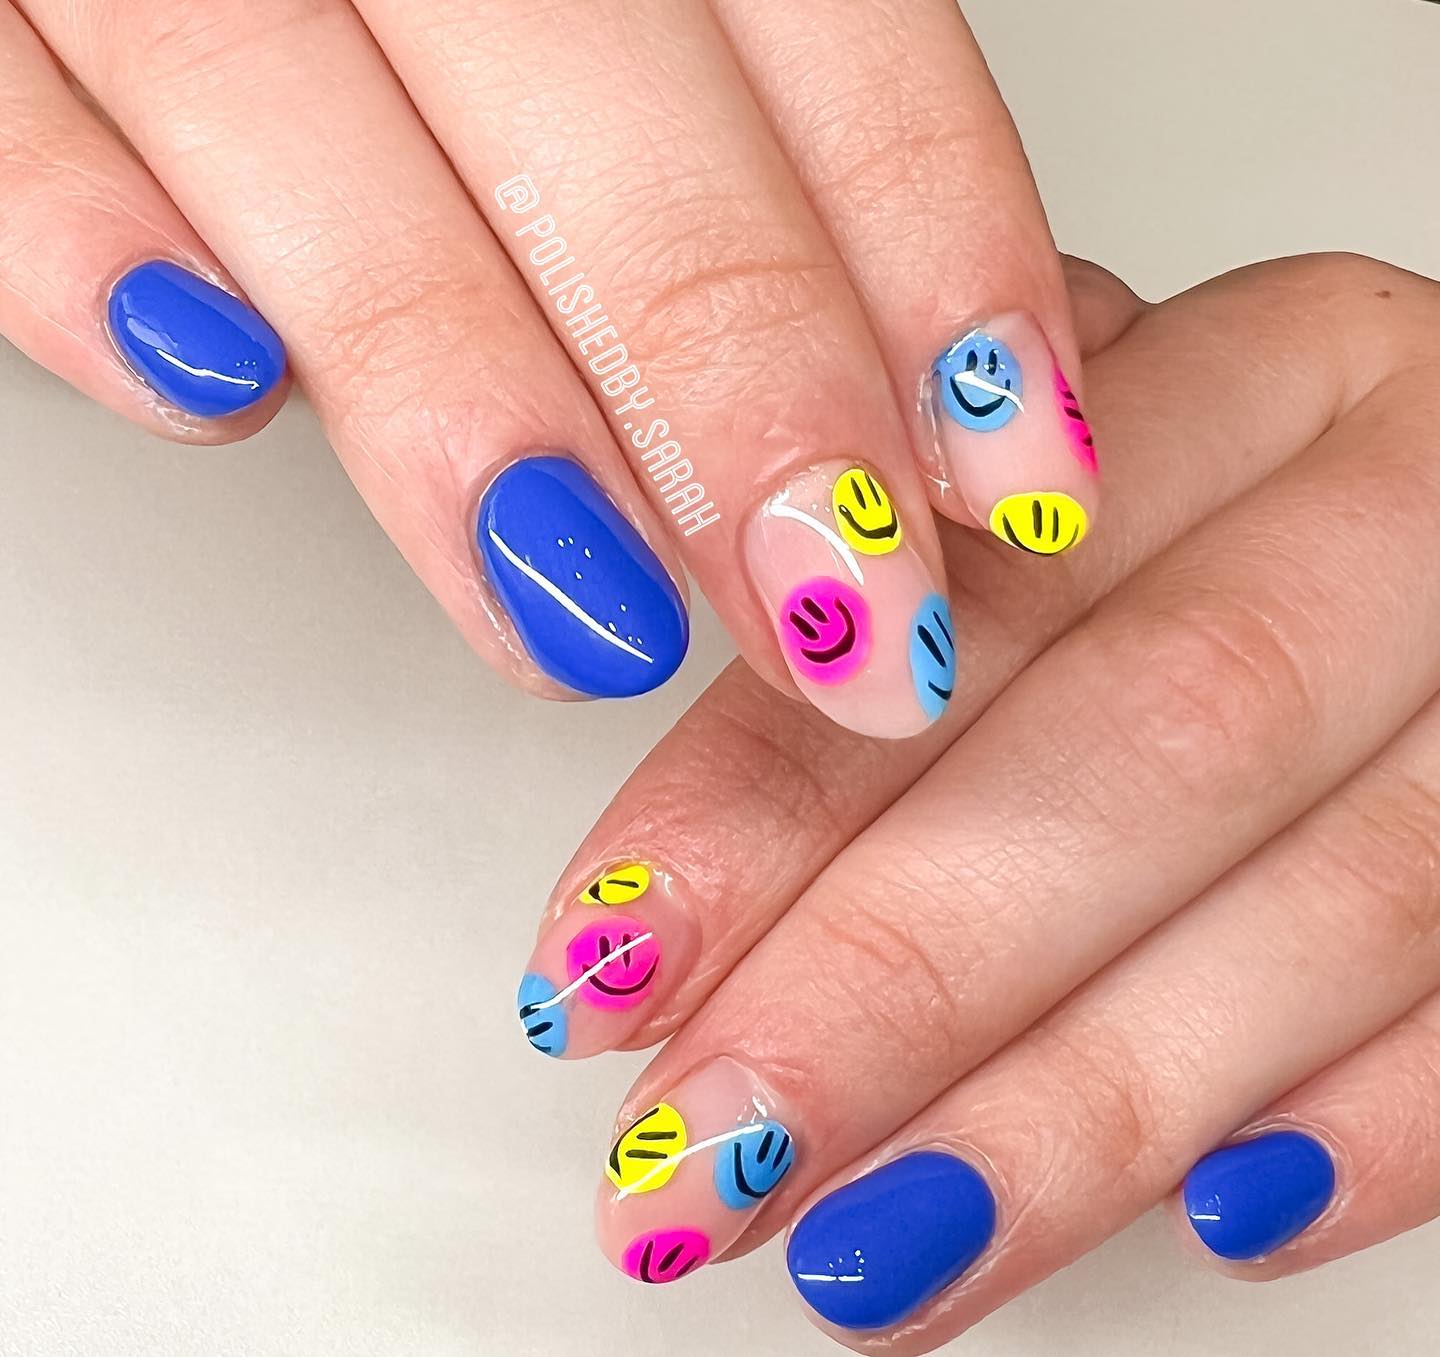 Here is a fun nail design idea for neon nails. Everyone will realize your nails with these two colorful smiley face accents.